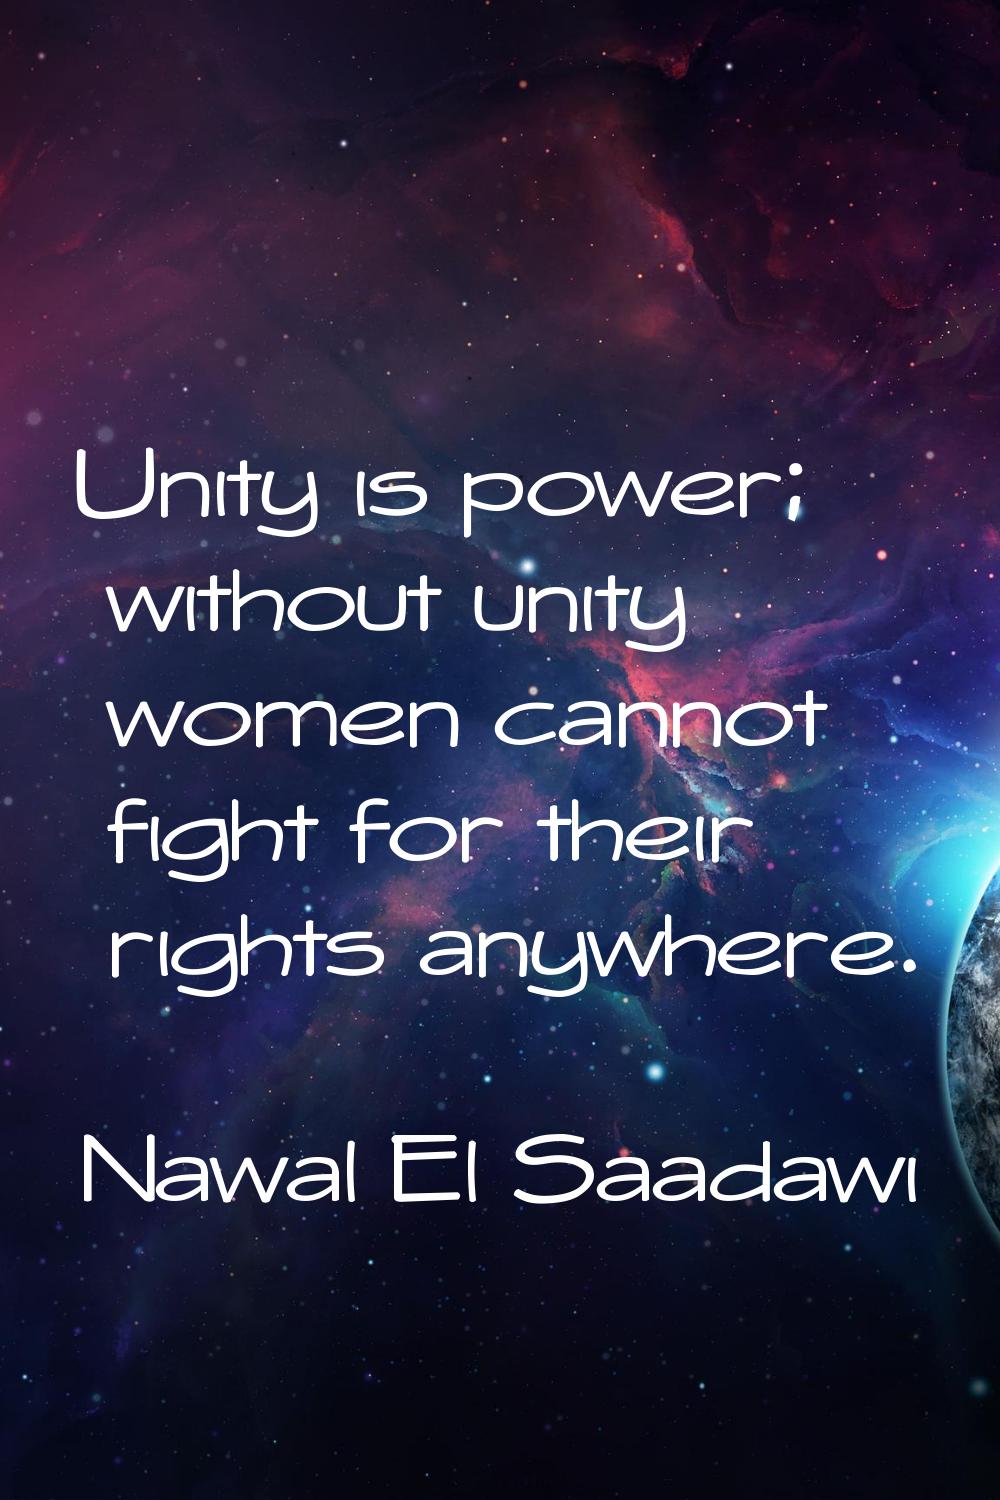 Unity is power; without unity women cannot fight for their rights anywhere.